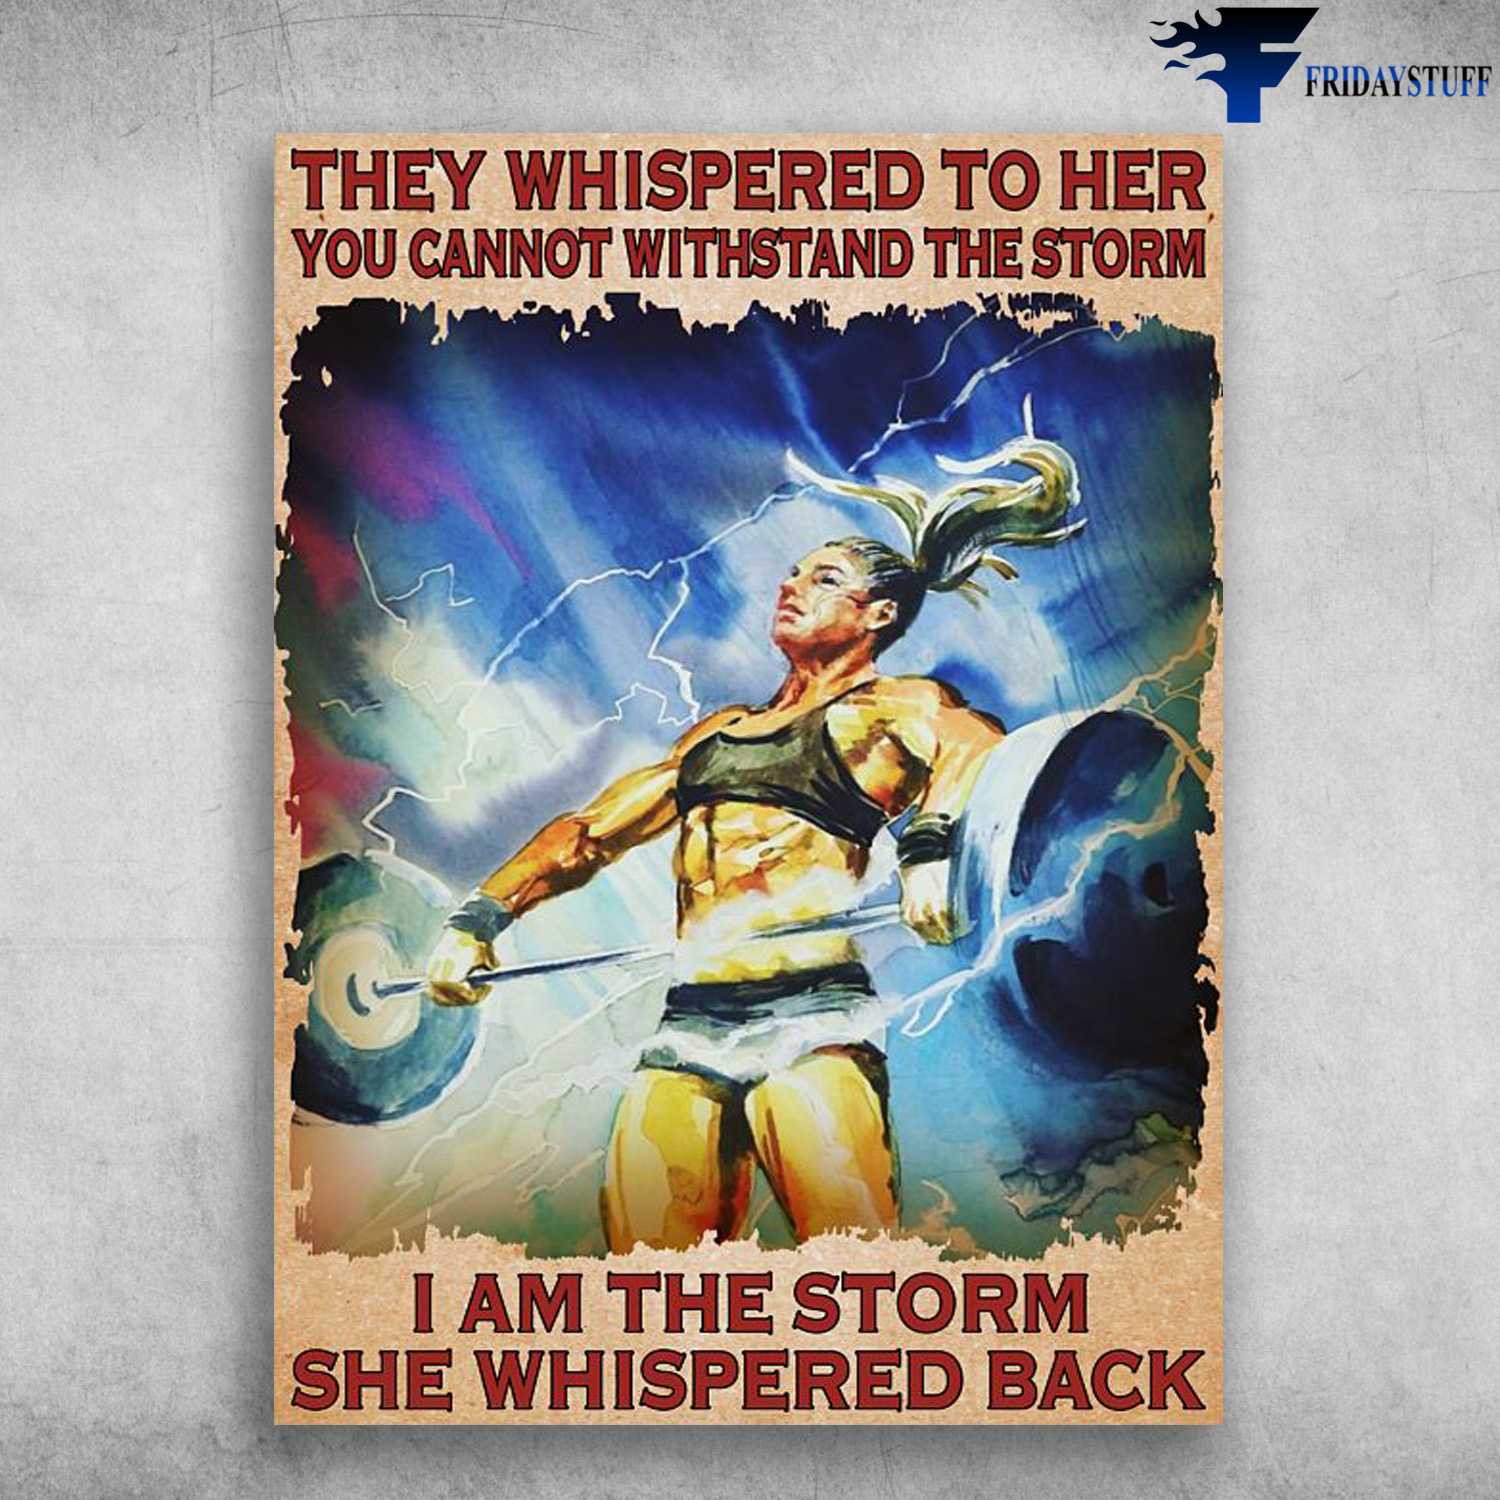 Gym Girl, Gym Poster, That Whispered To Her, You Cannot Withstand The Storm, I Am The Storm, She Whispered Back